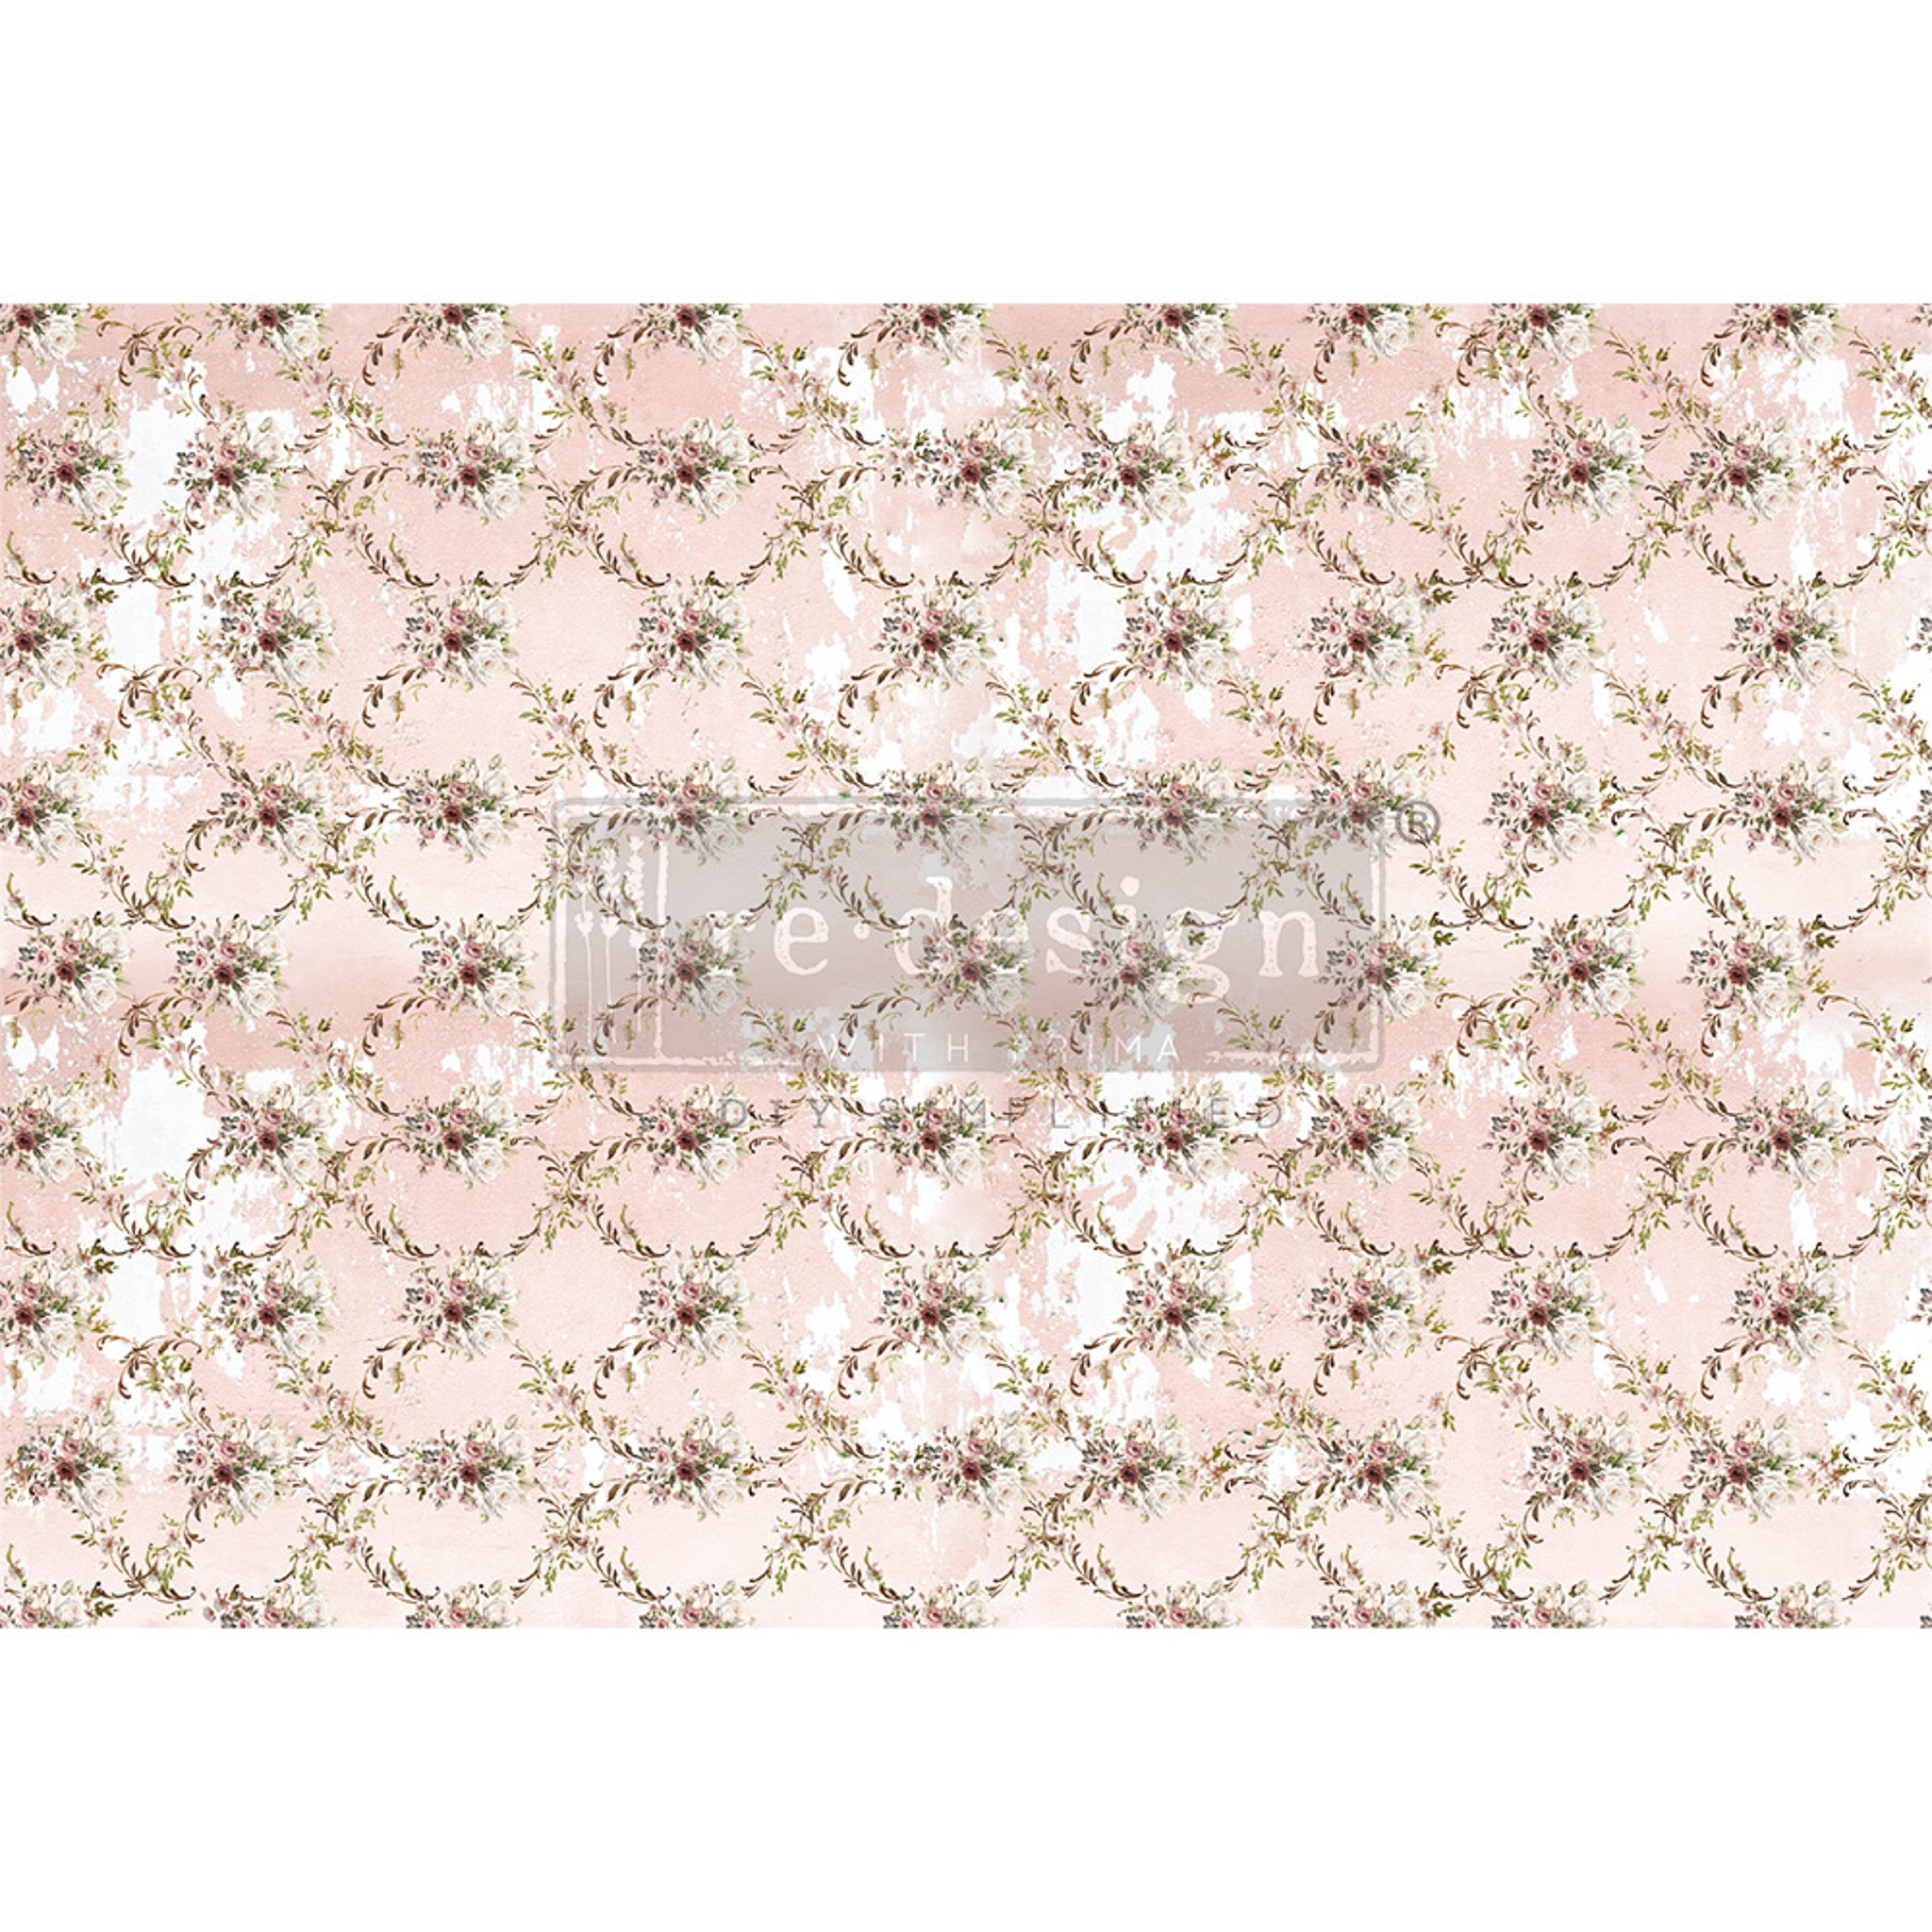 Tissue paper design that features a repeating dainty floral diamond vining design against a pale pink and white background.